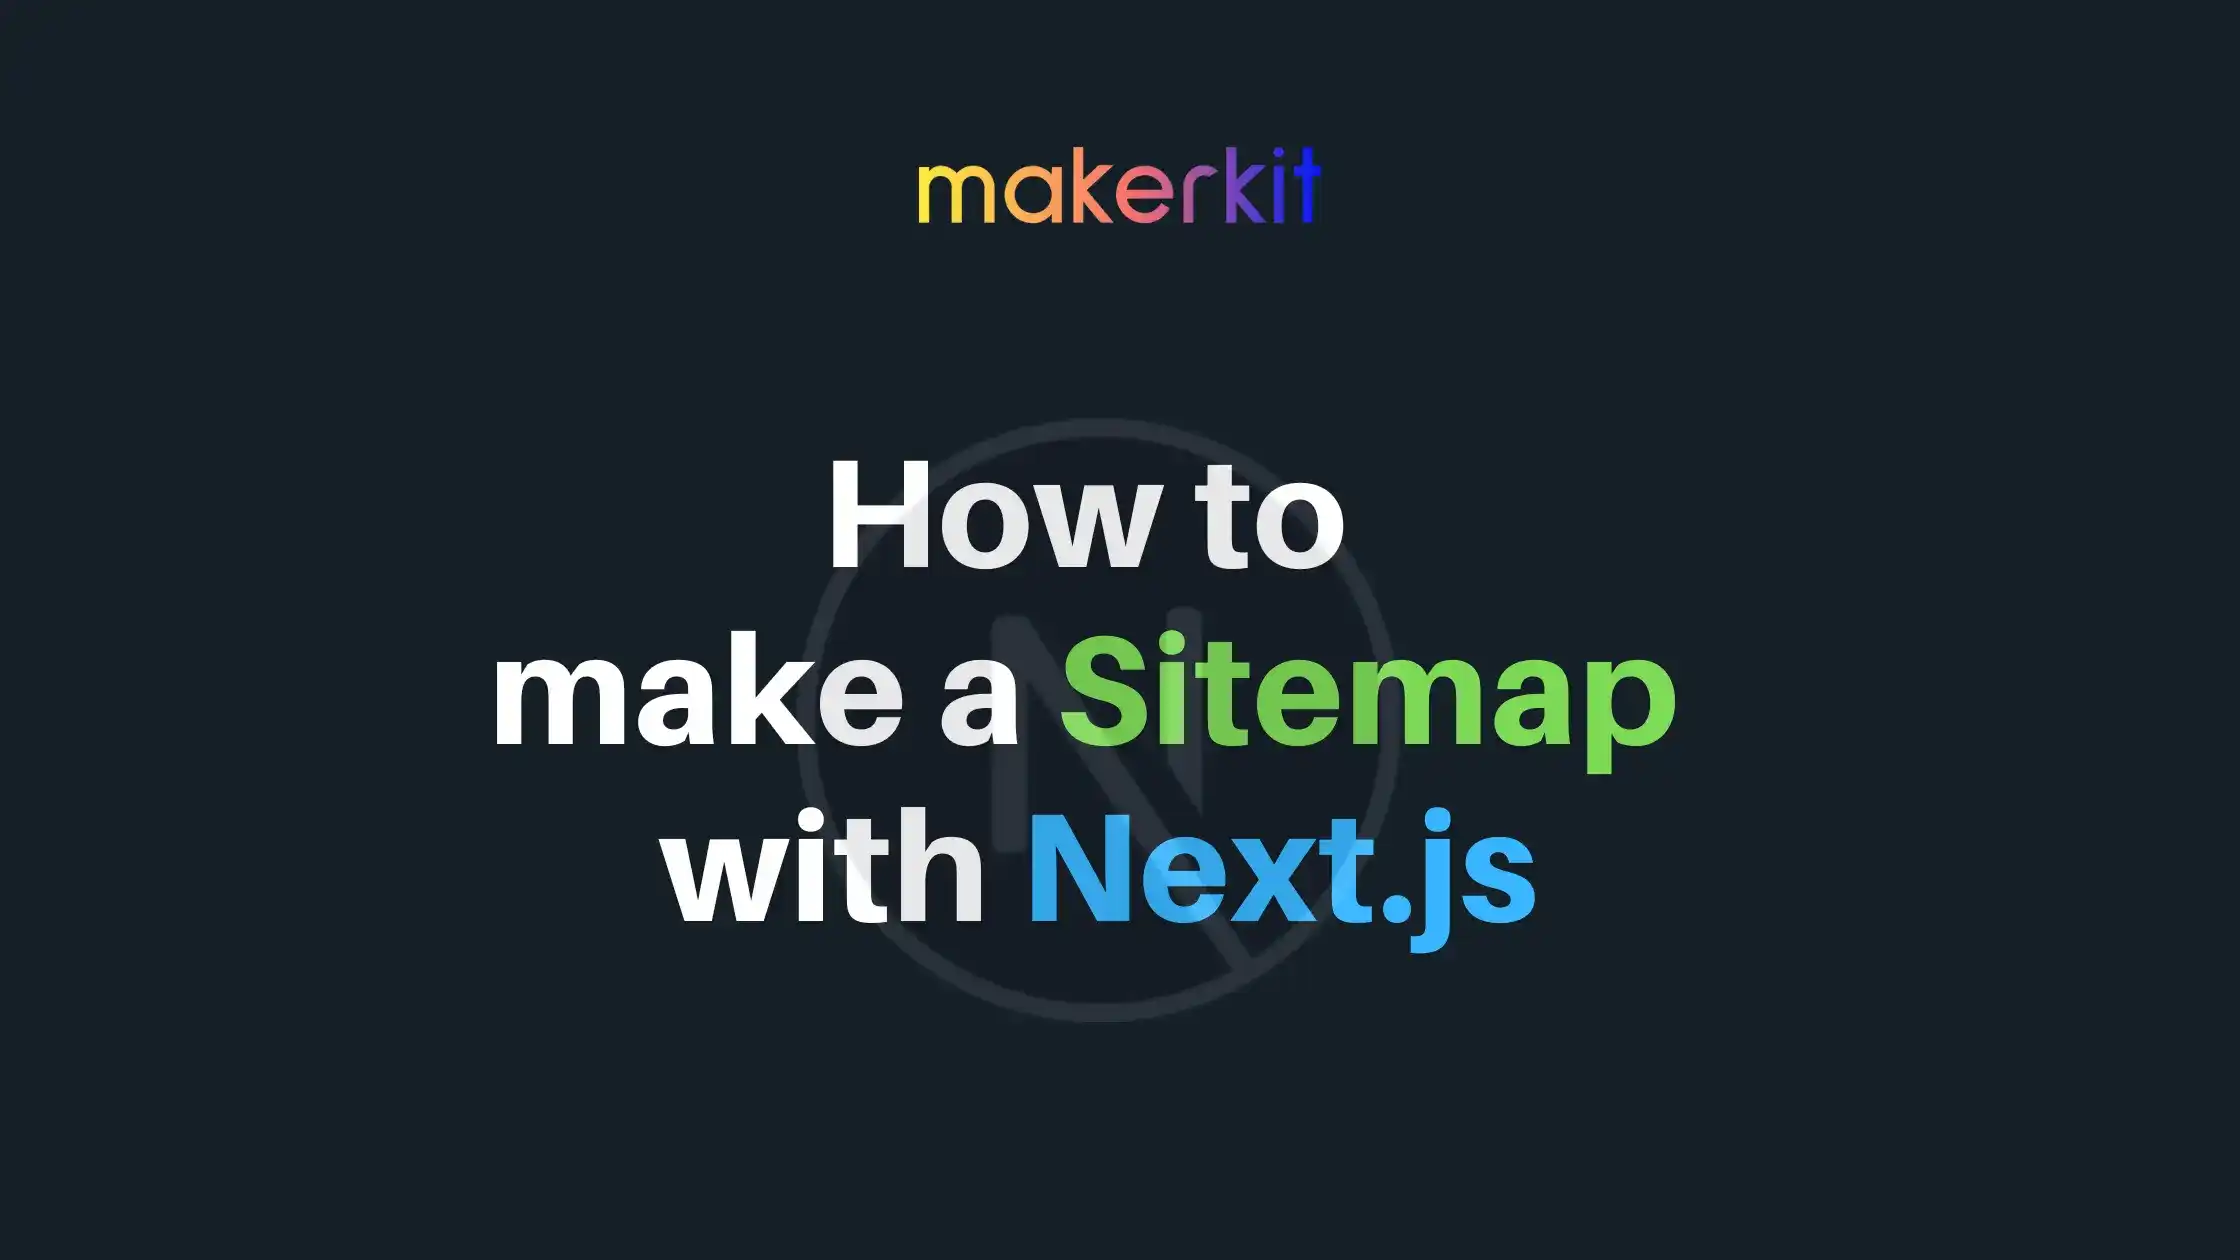 Cover Image for How to make a Sitemap with Next.js